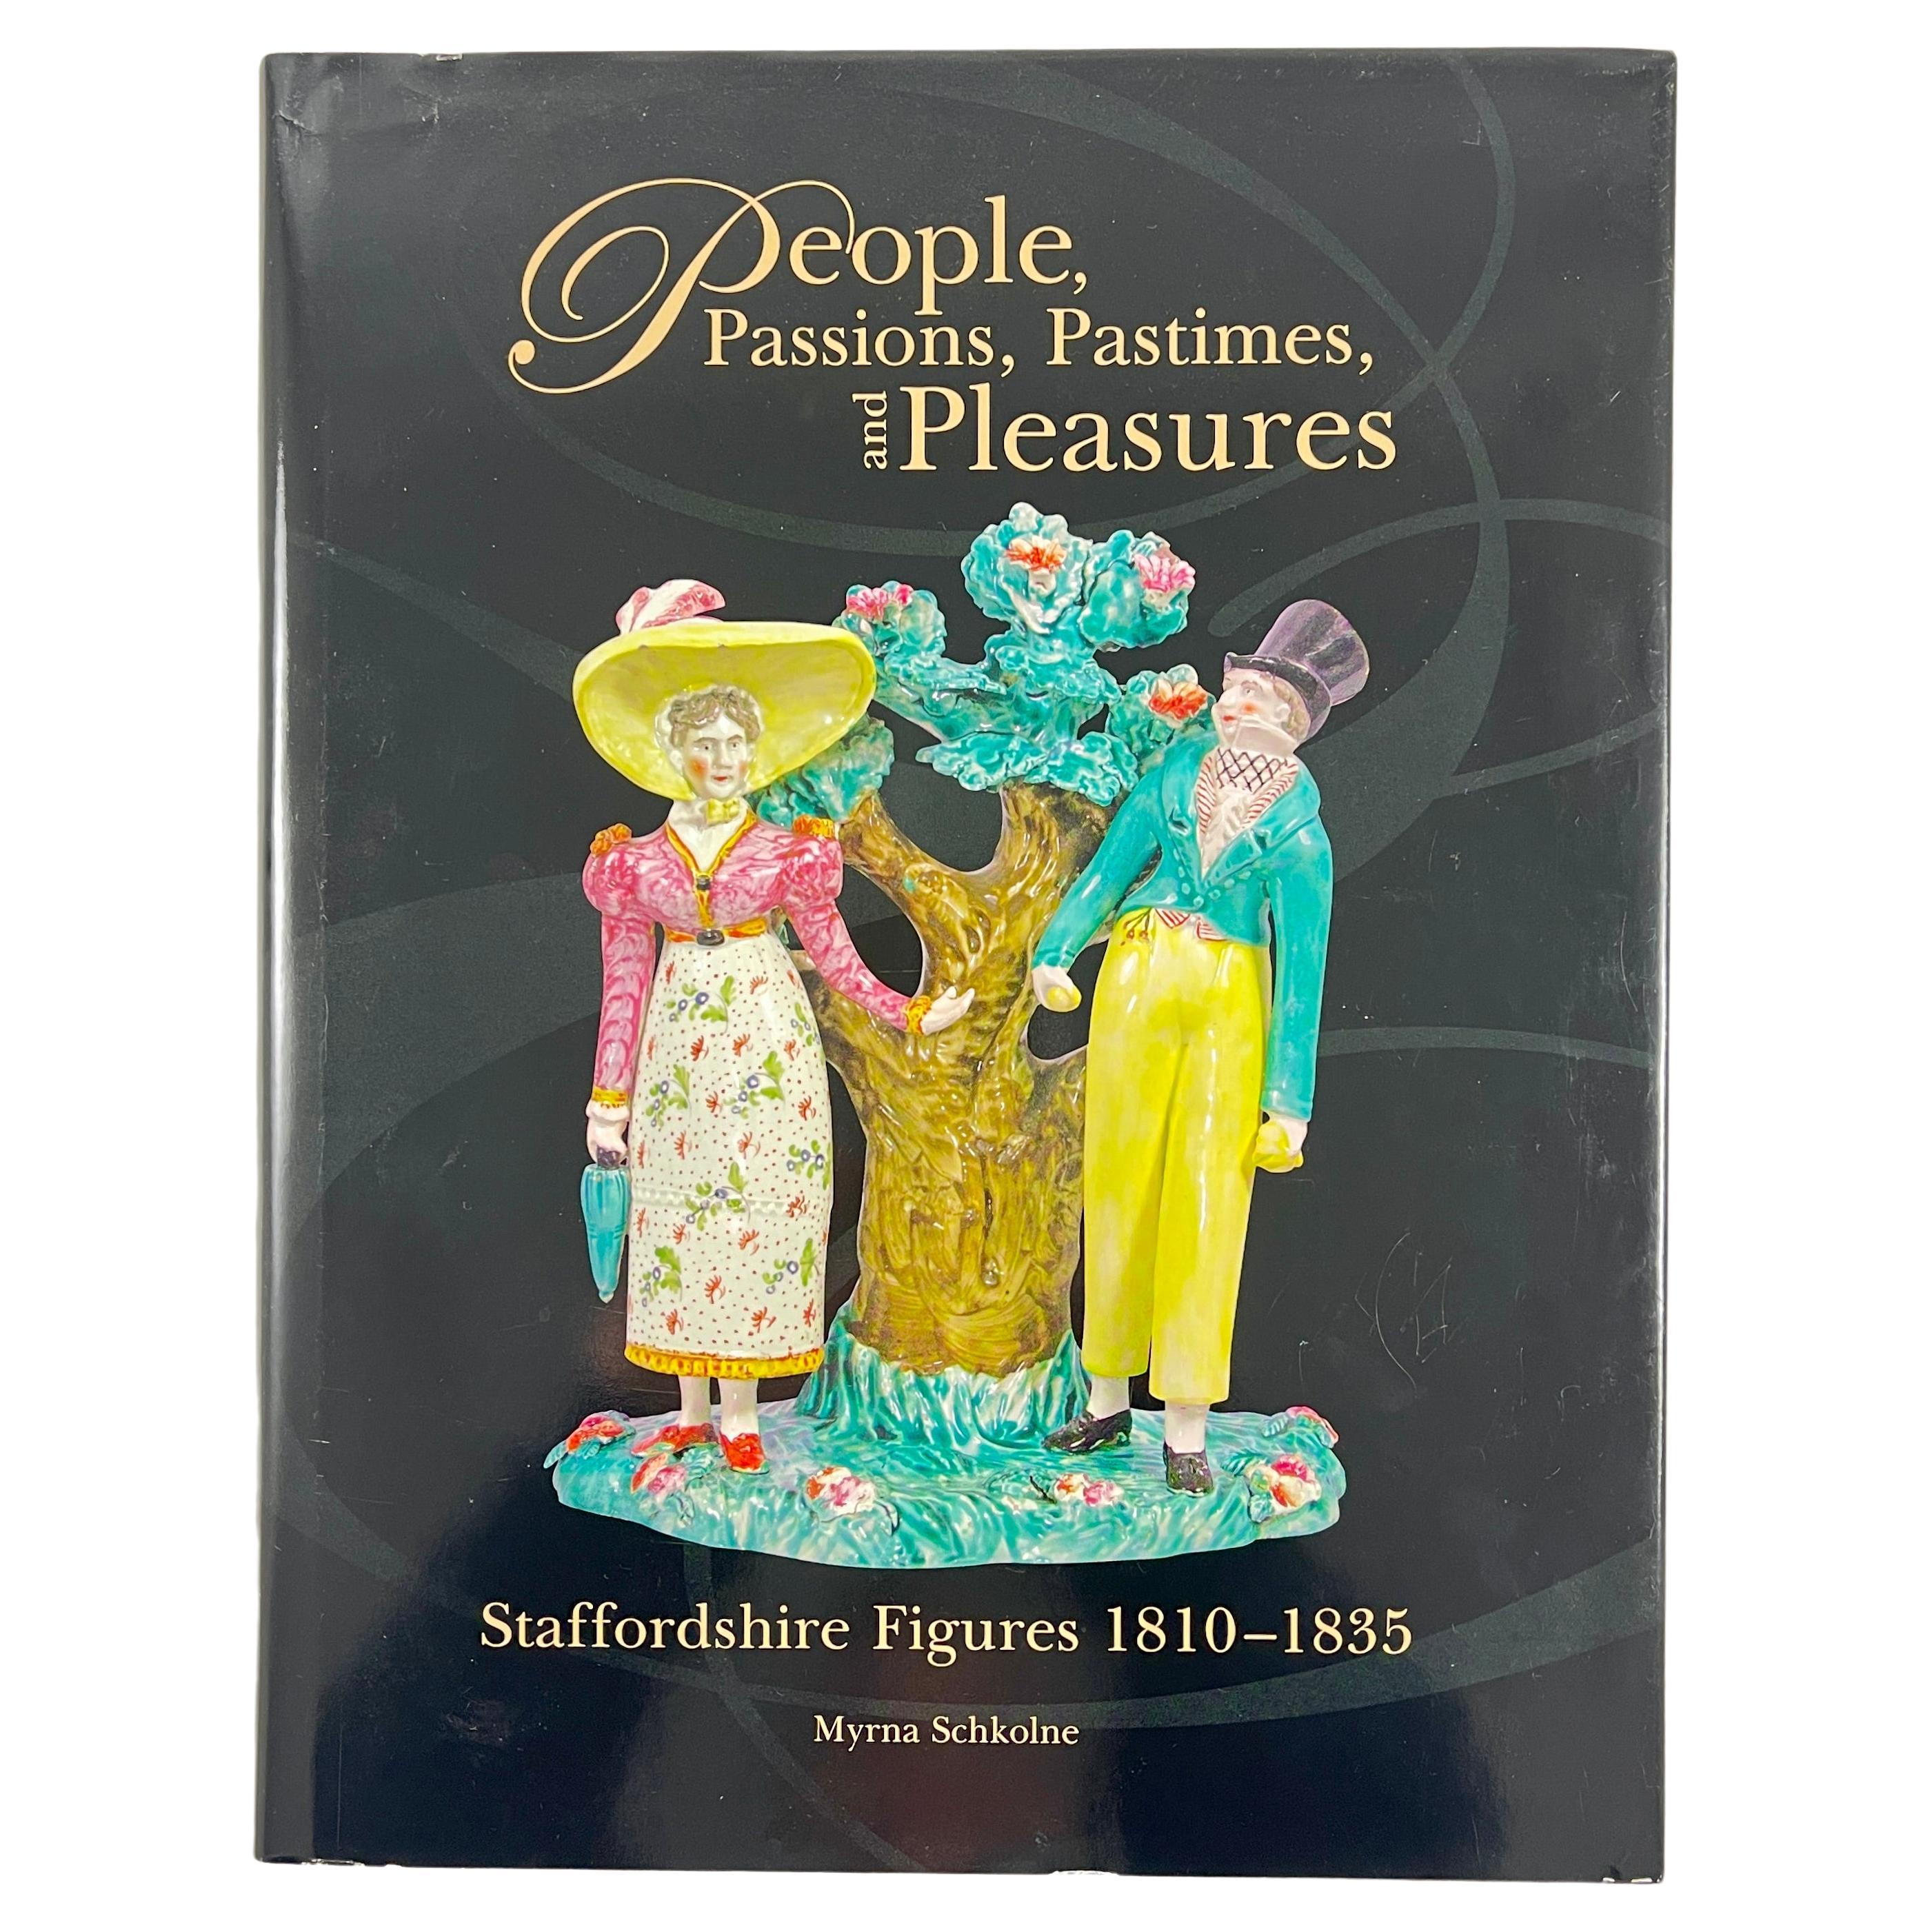 People, Passions, Pastimes, and Pleasures: Staffordshire Figures, 1810-1835 